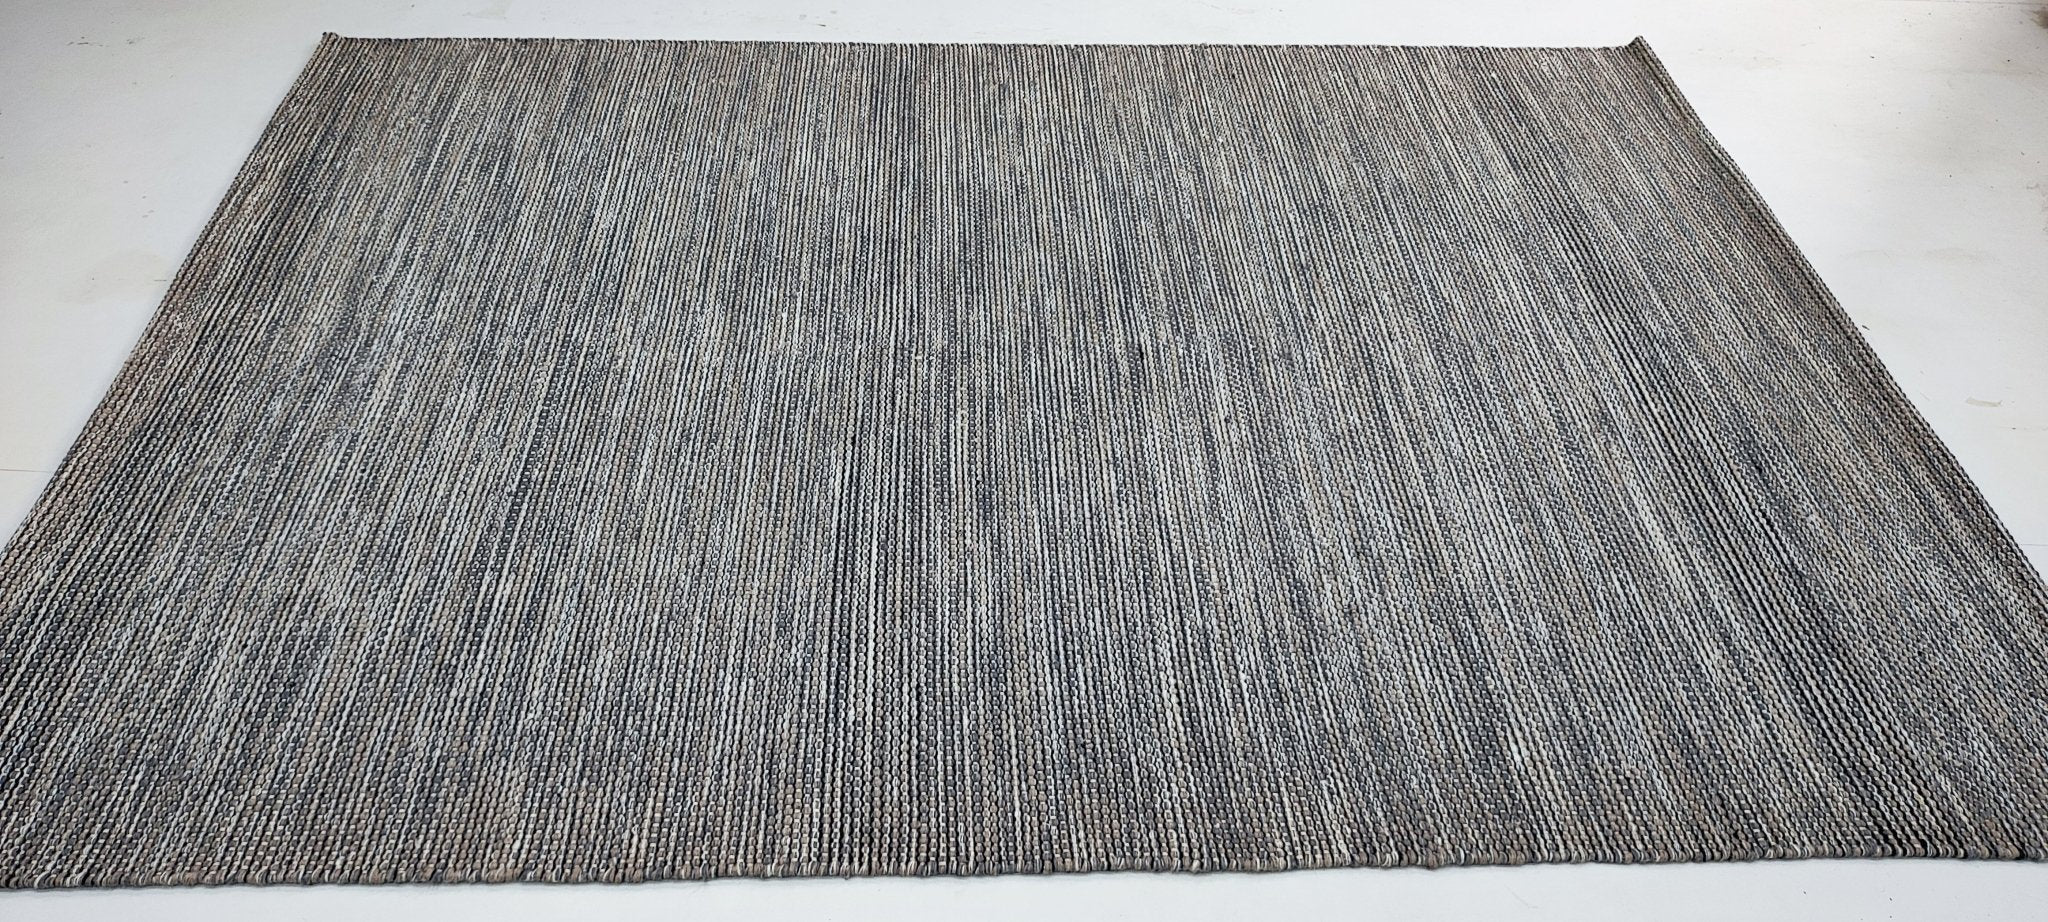 Chewbacchus 5.6x7.6 Handwoven Grey Textured Durrie | Banana Manor Rug Factory Outlet